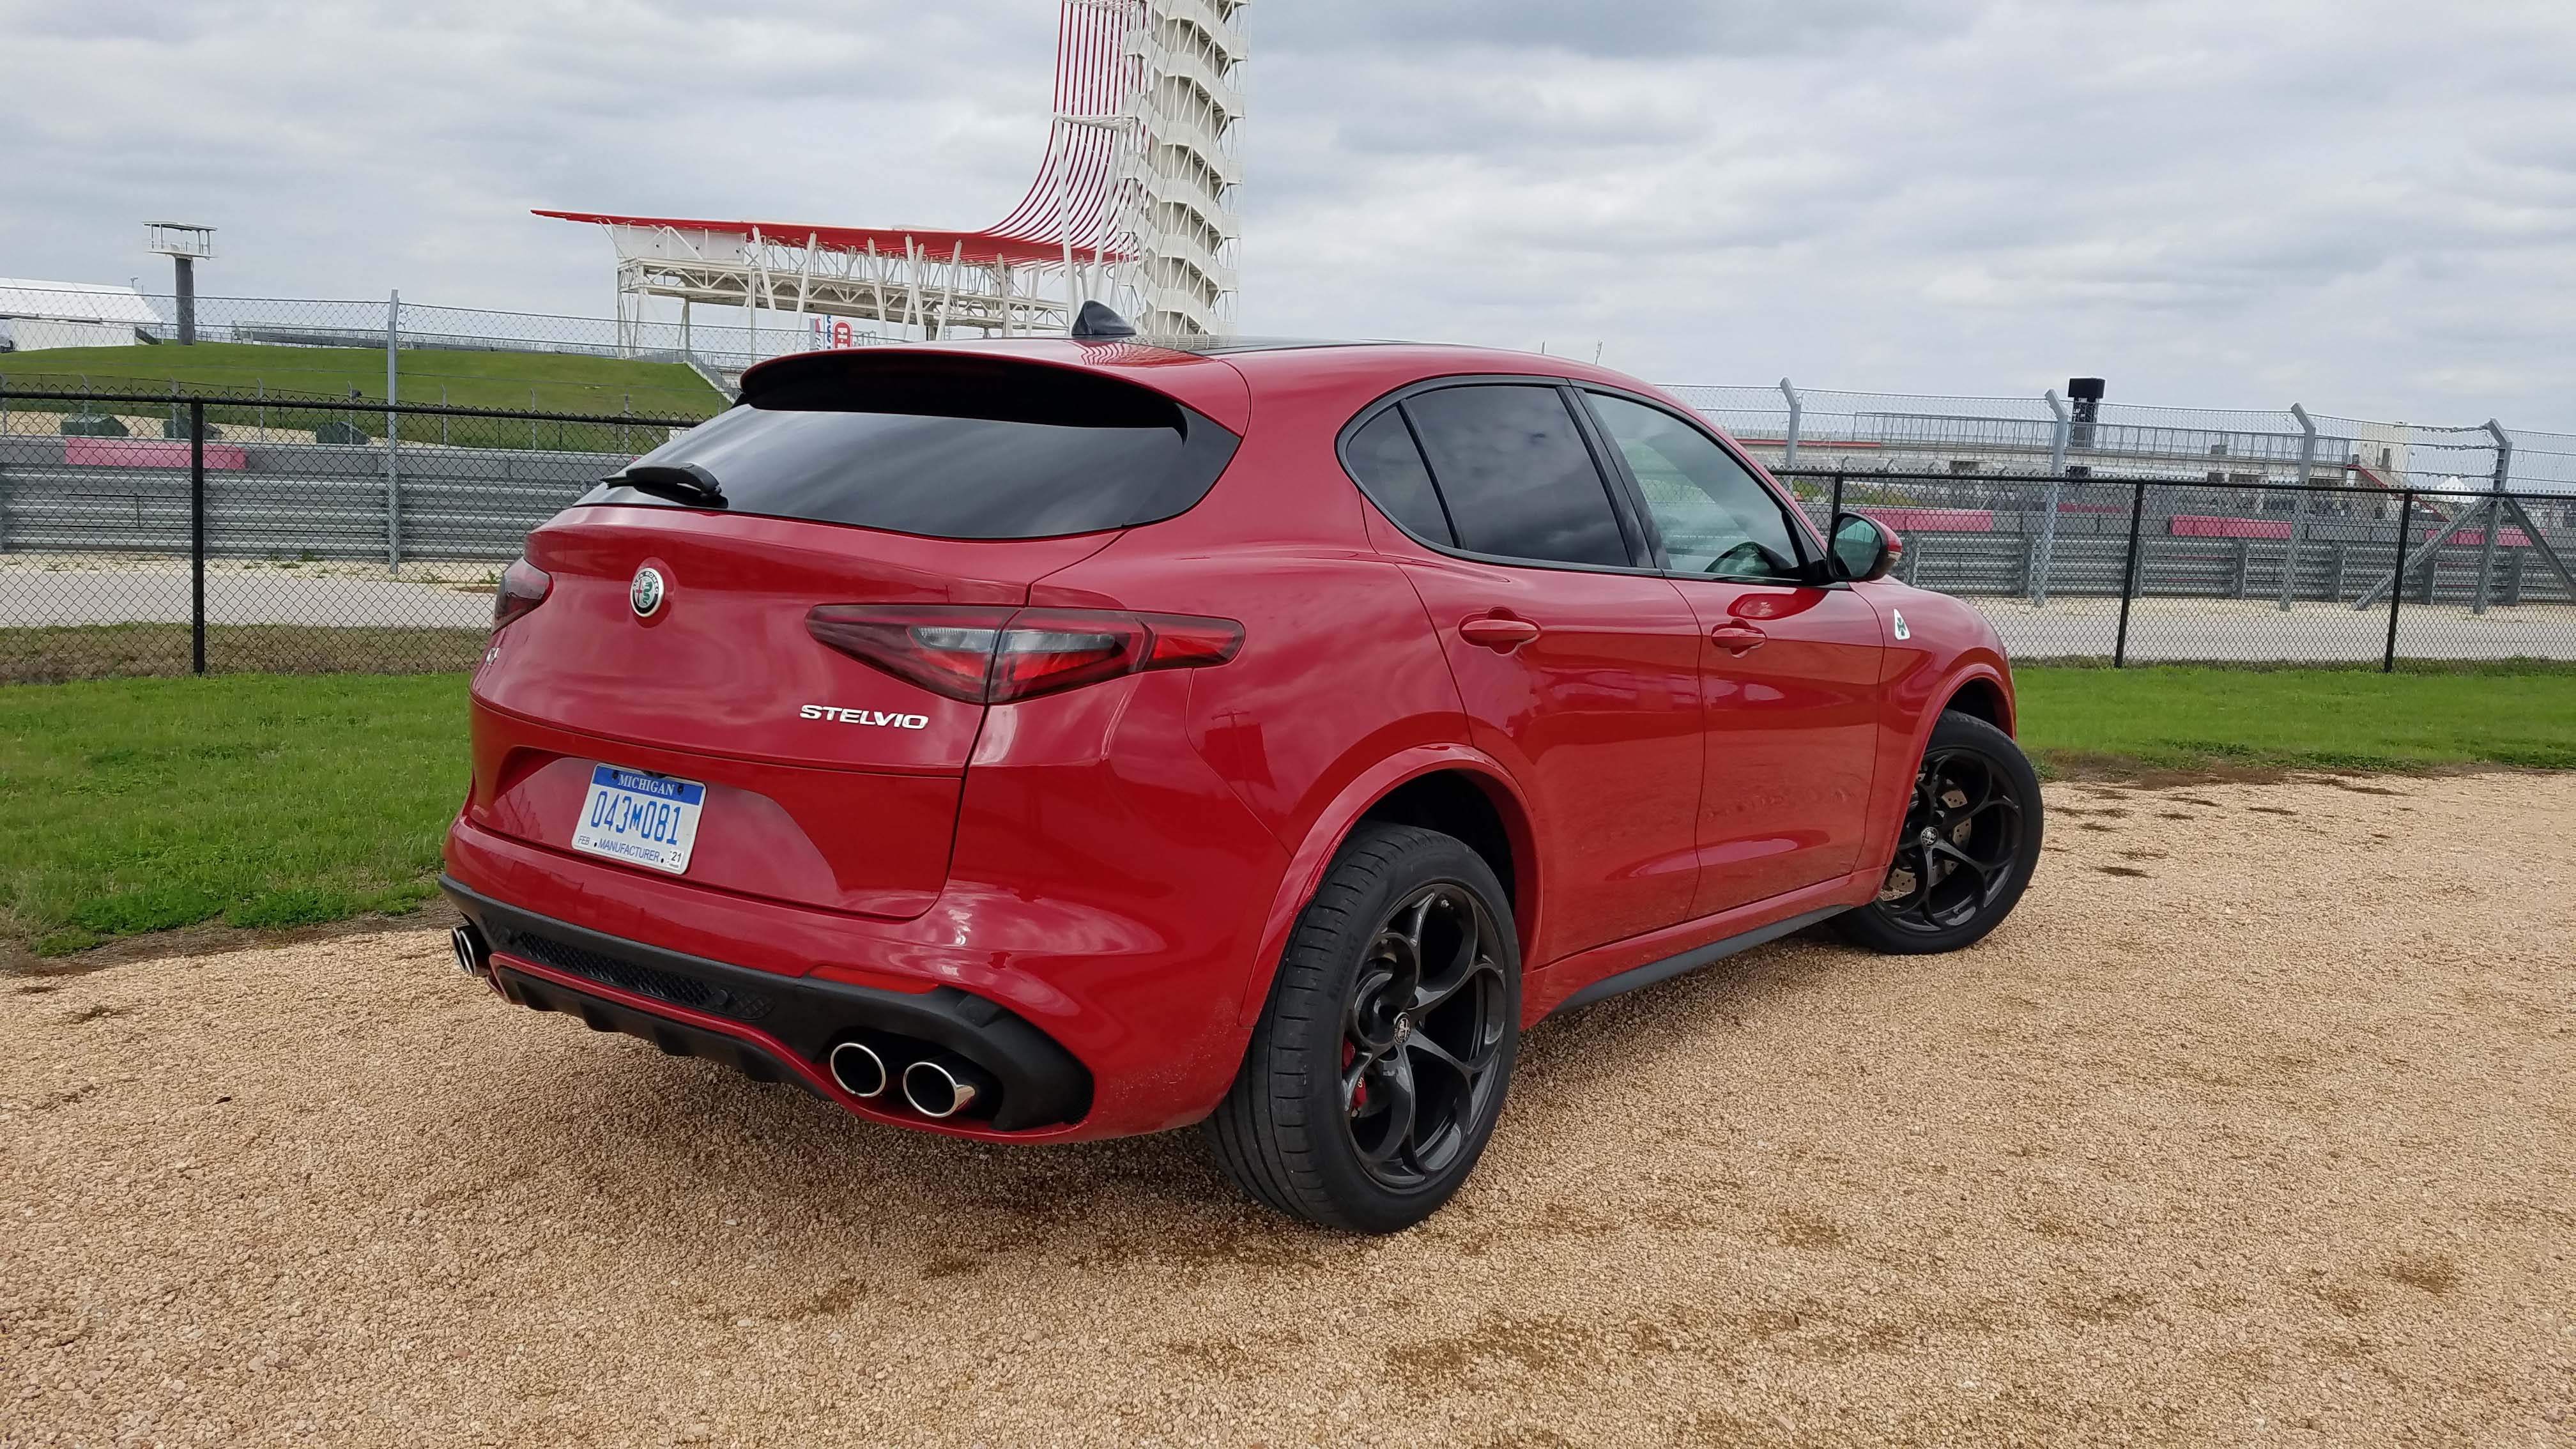 The Alfa Romeo Stelvio Quadrifoglio debuted to the media at Circuit of the Americas race track in Texas where Detroit News auto critic Henry Payne took it for a spin.